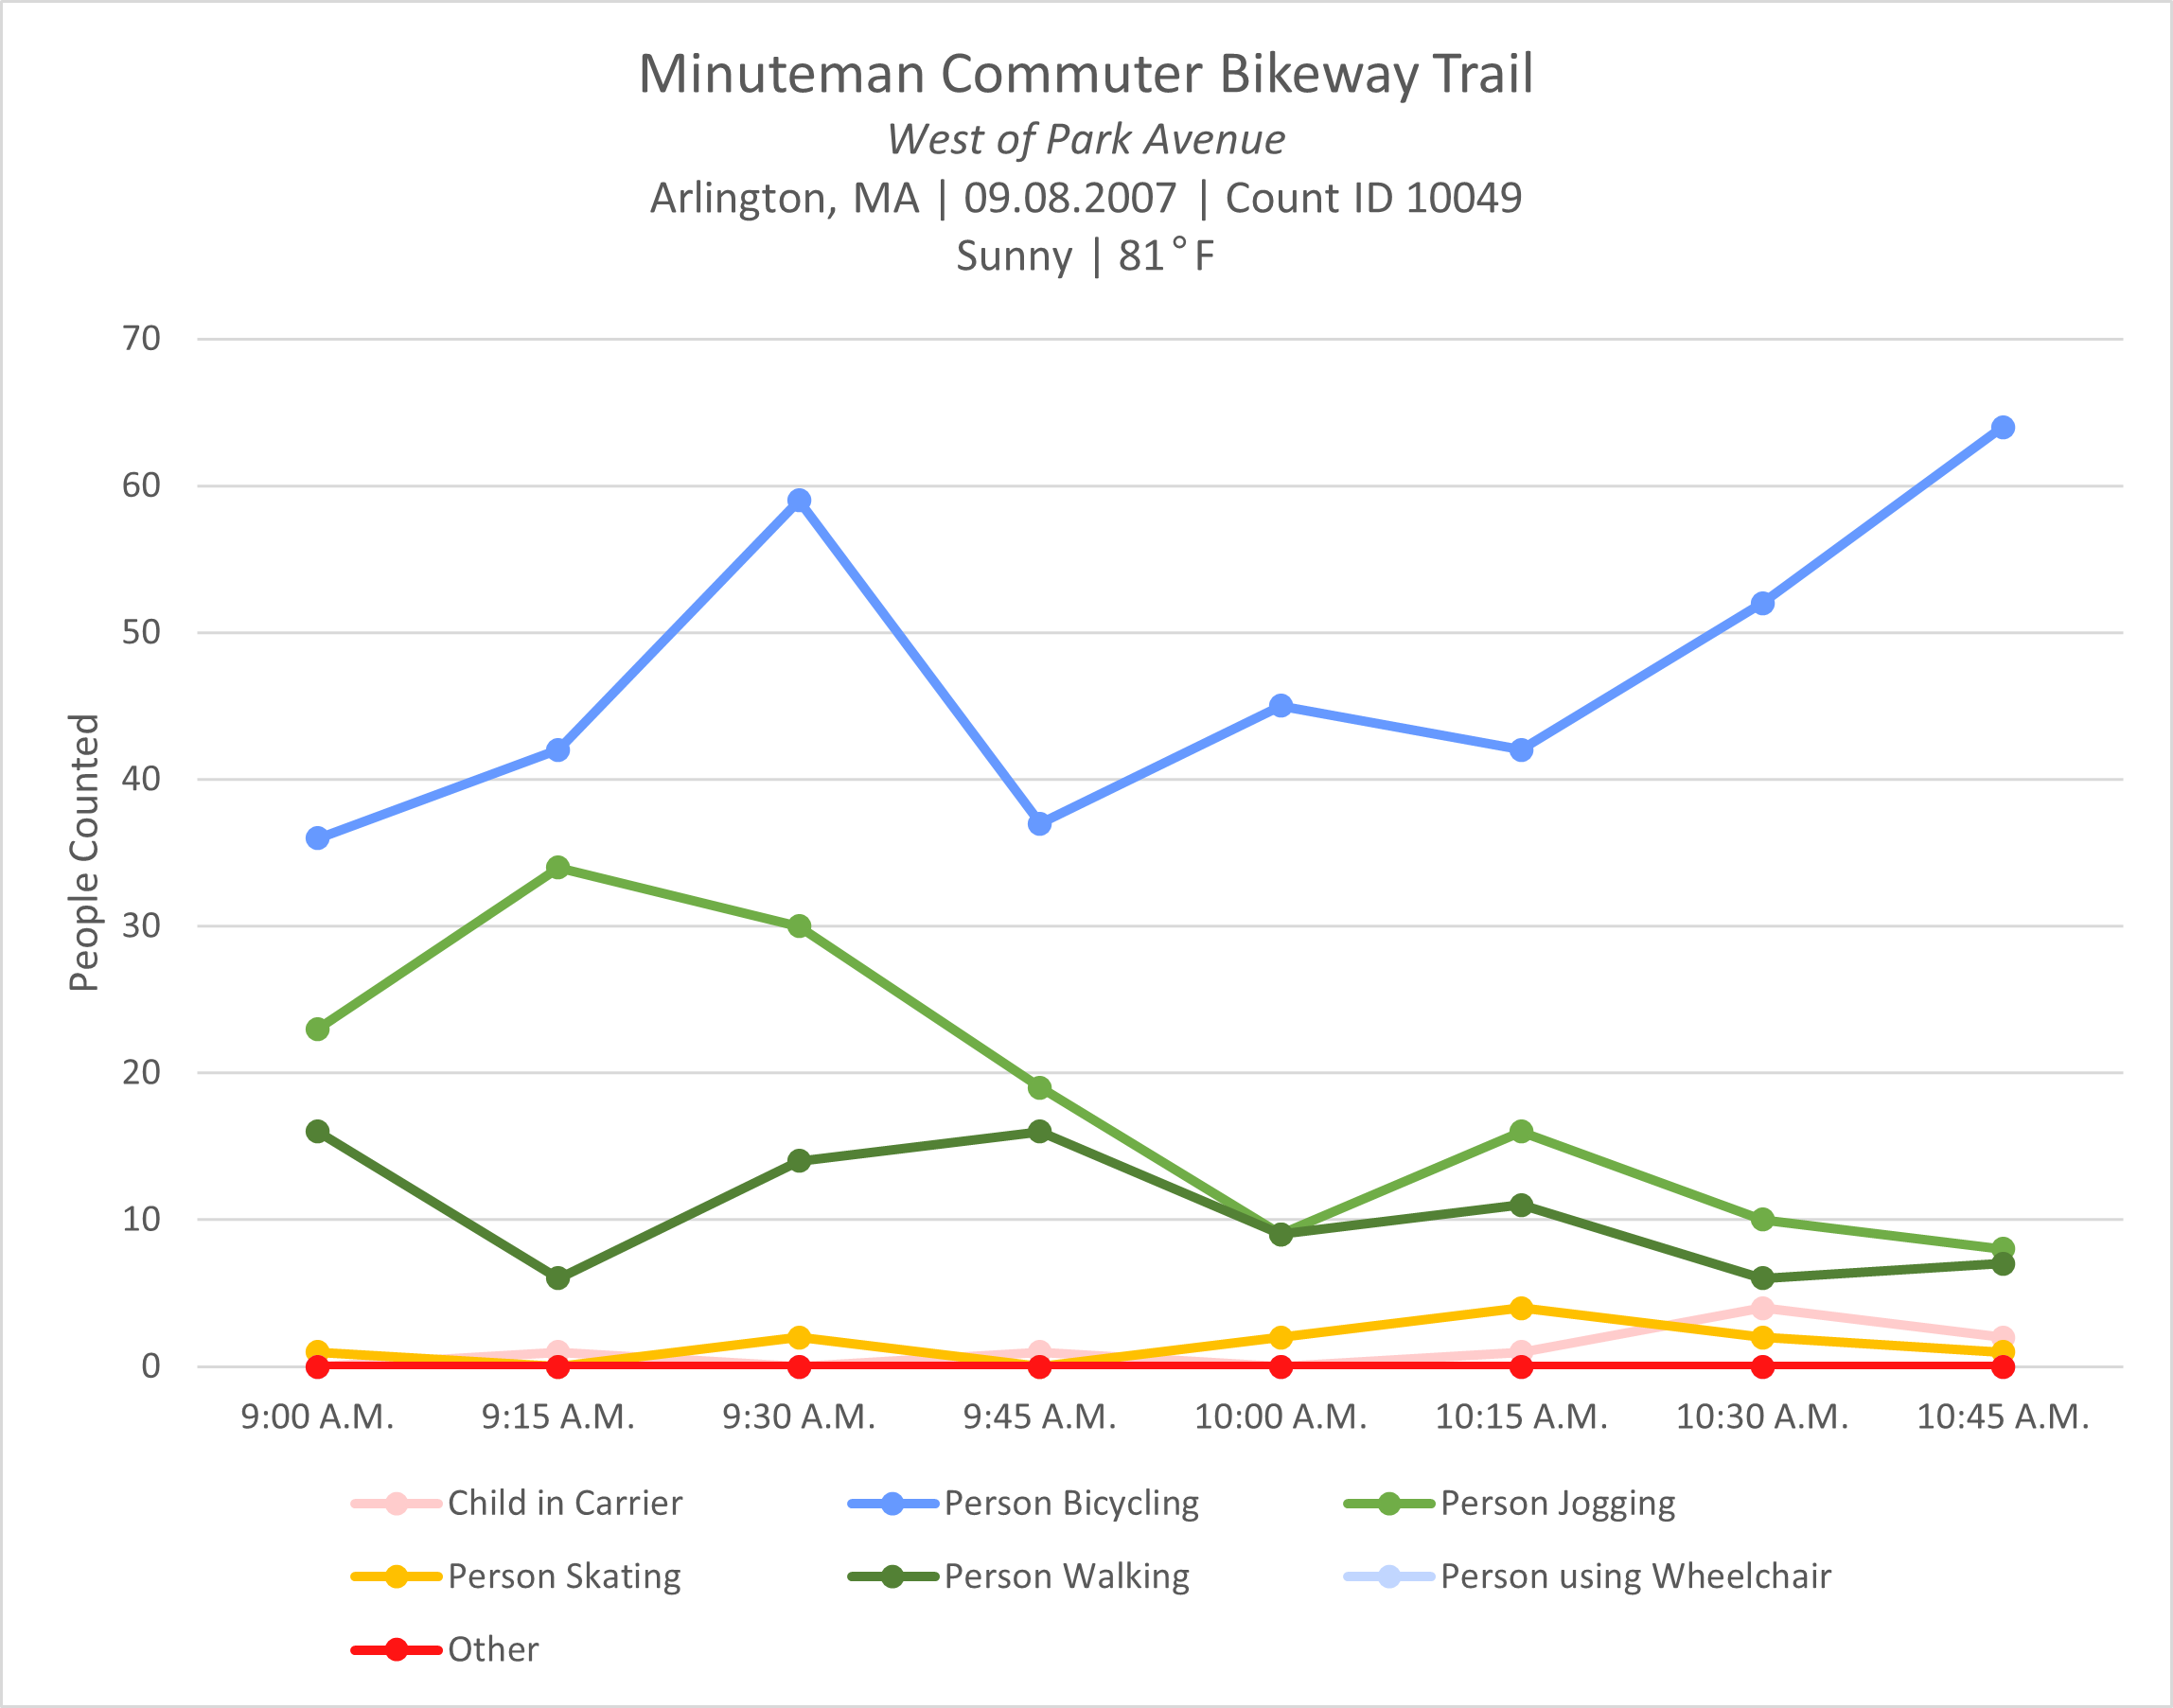 Proposed Information Display for a Specific Count Session. The figure is a line chart that shows data points colored-coded for each mode, with a line of a matching color connecting the points. In this graph, the number of people bicycling is represented by blue points and lines, people jogging are light green, people walking are dark green, people skating are yellow, children in carriers are pink, people using wheelchairs are light blue, and red represents other modes. At the top of the bar chart is information about the count session, including a descriptive name for the location, the municipality, the date, the count identification number, and the weather conditions.